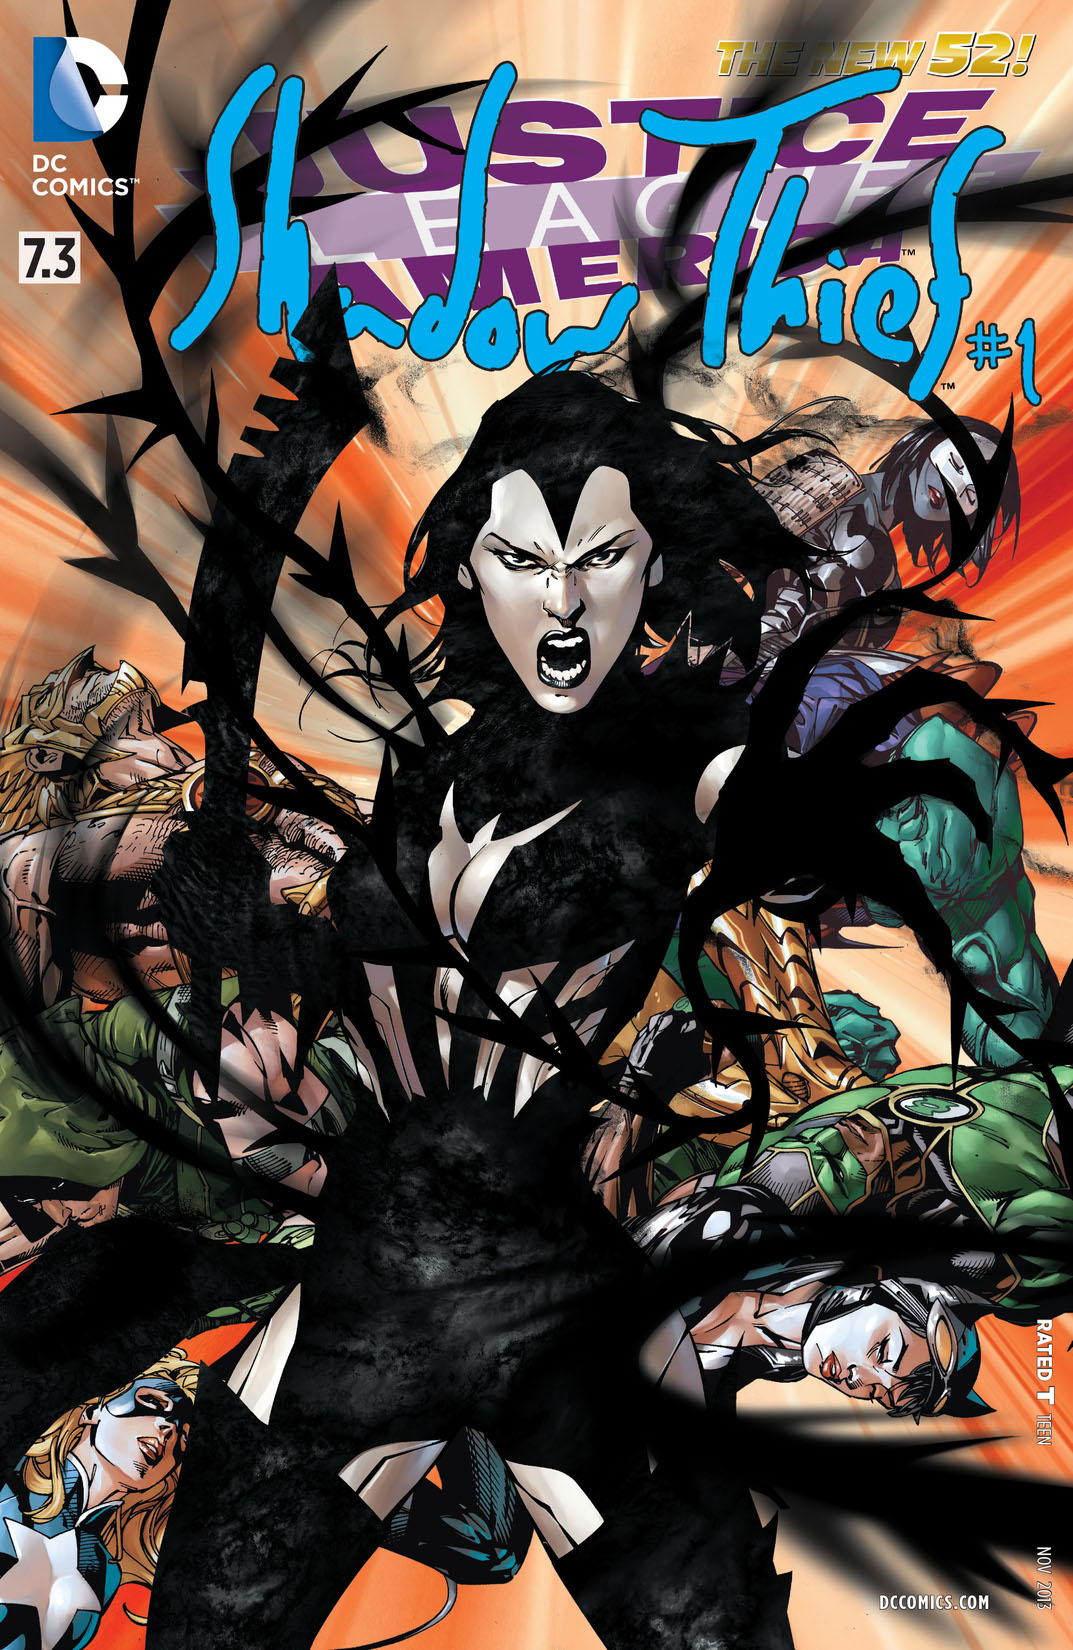 Justice League of America feat Shadow Thief (2013-) #7.3 preview images